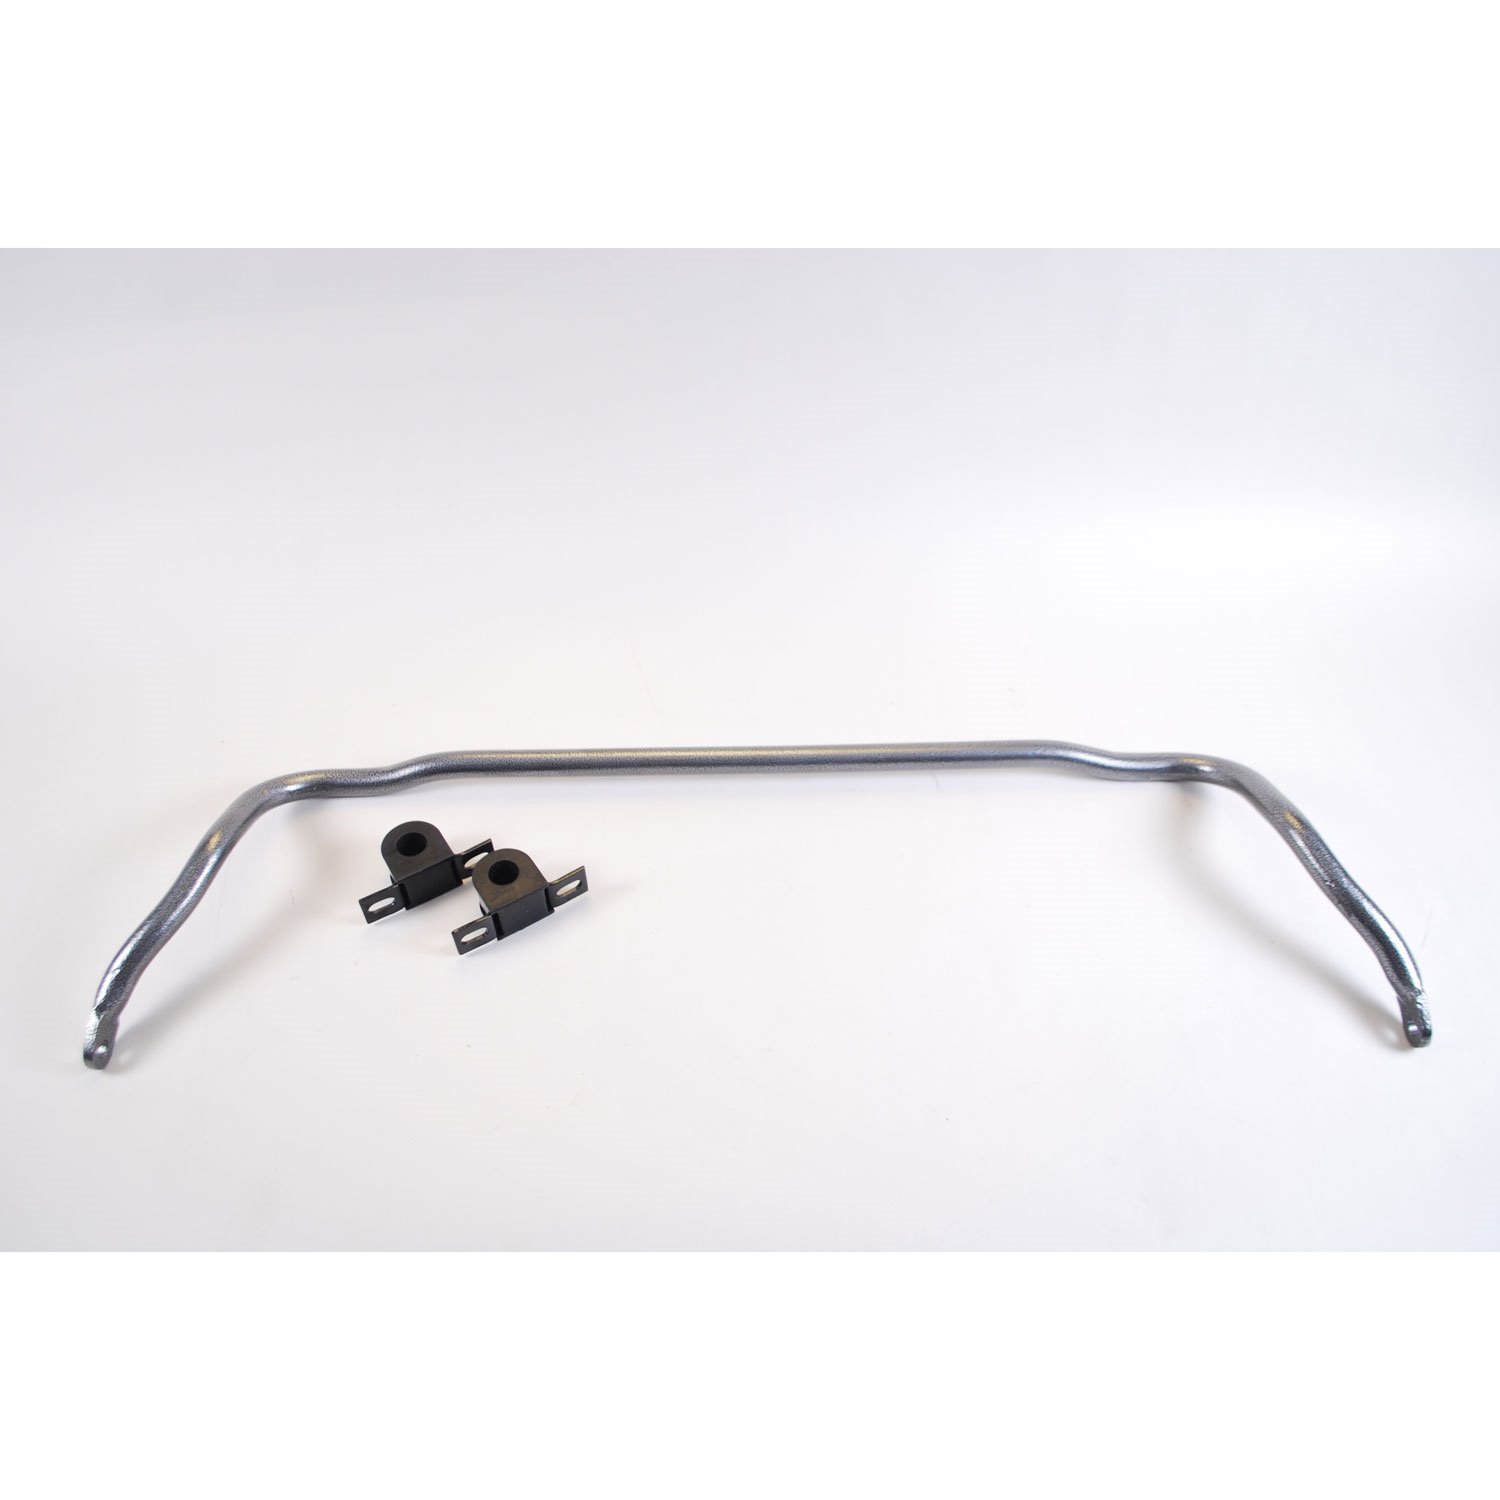 Front Sway Bar for 2005-2007 Ford F-250/F-350 Super Duty 4WD